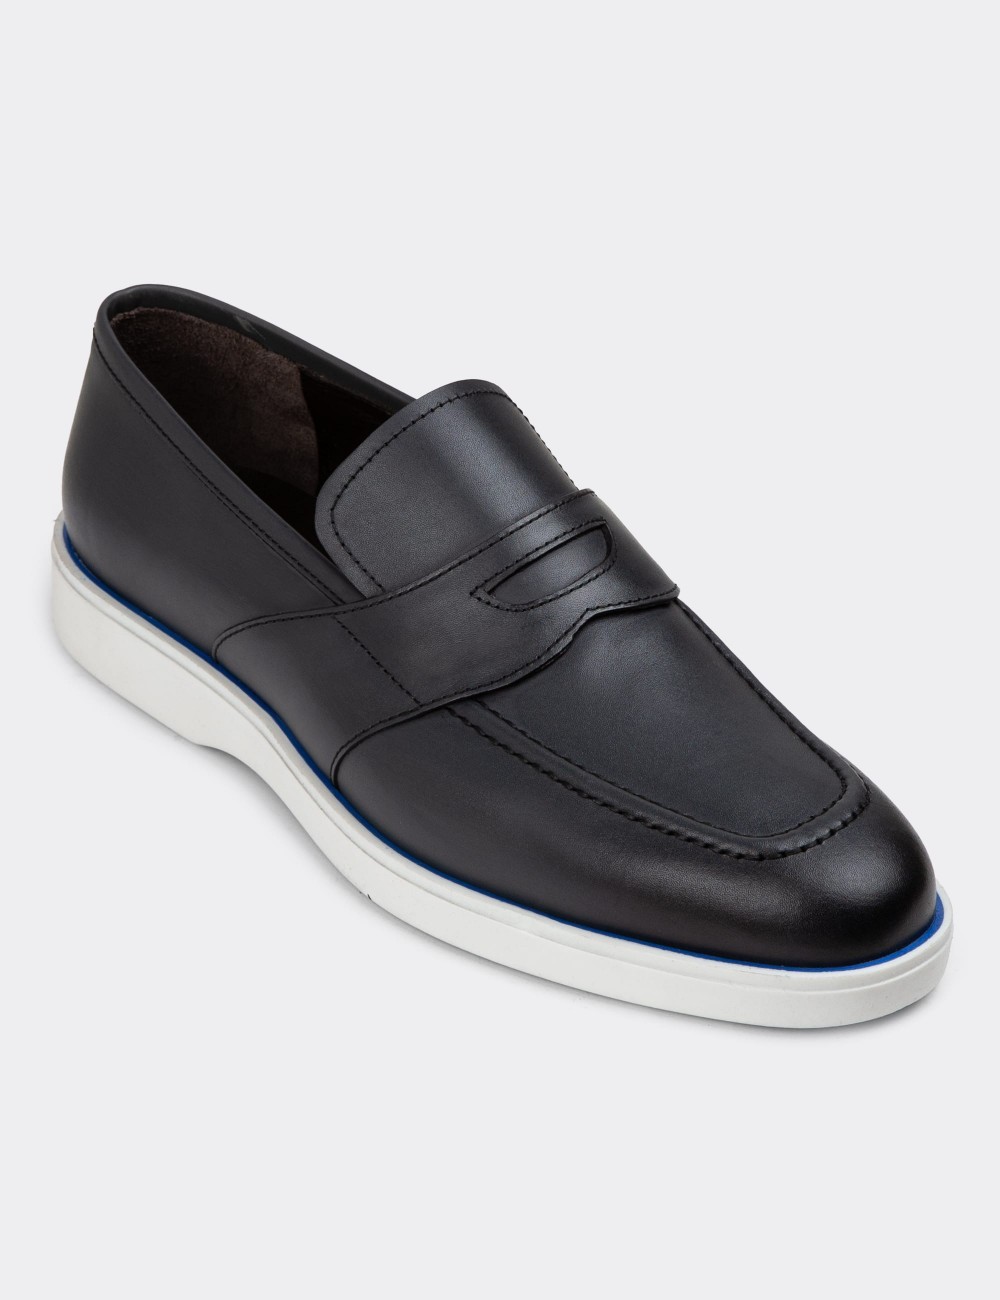 Gray Leather Loafers - 01960MGRIC01